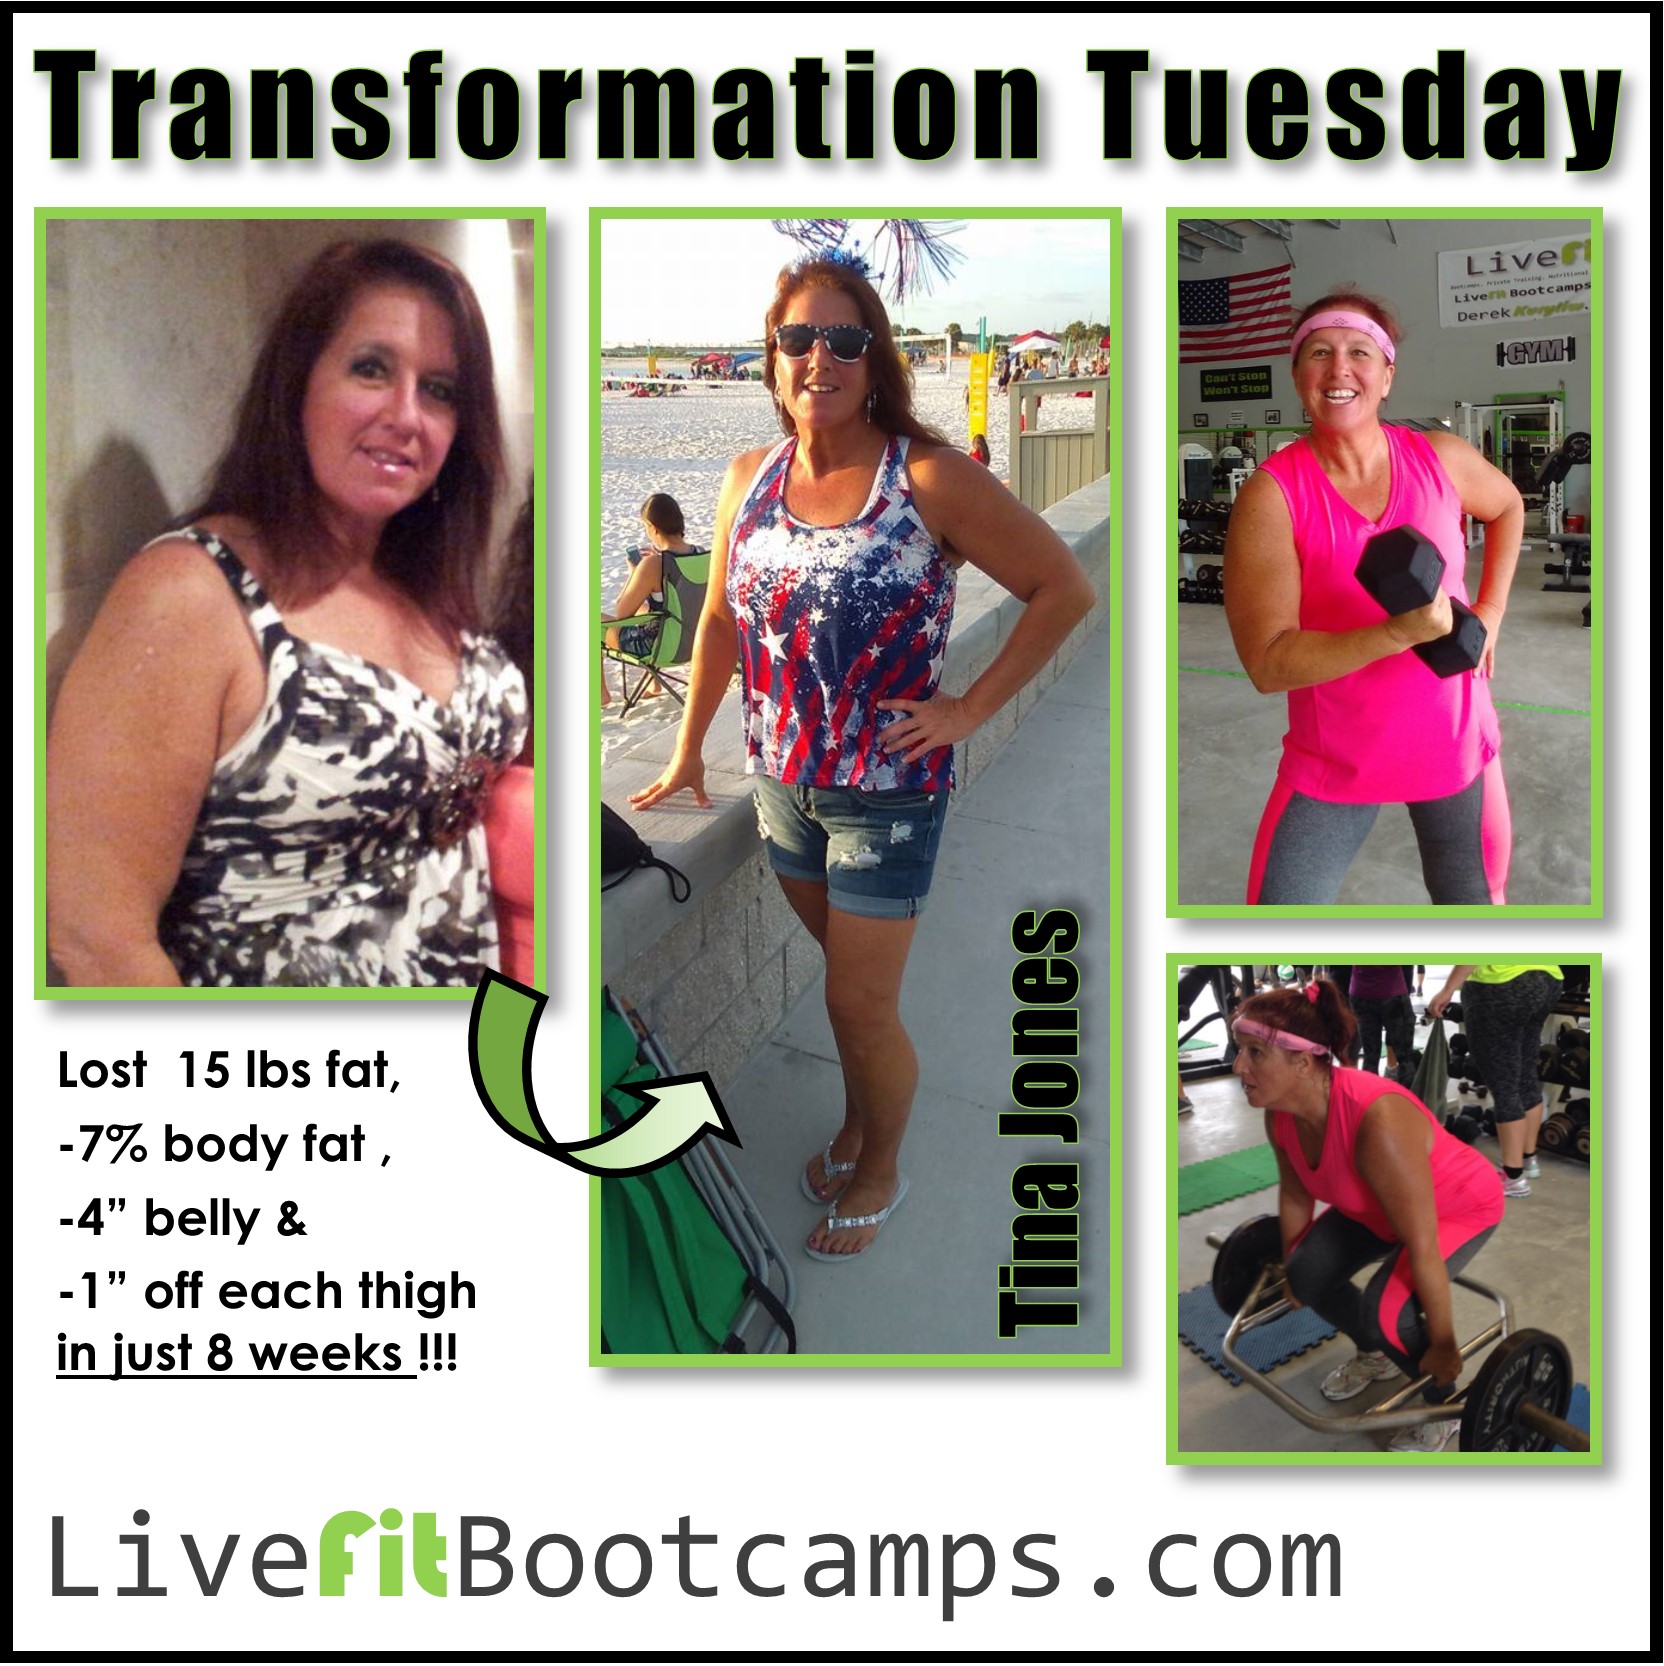 Tina’s Mind and Body Transformation